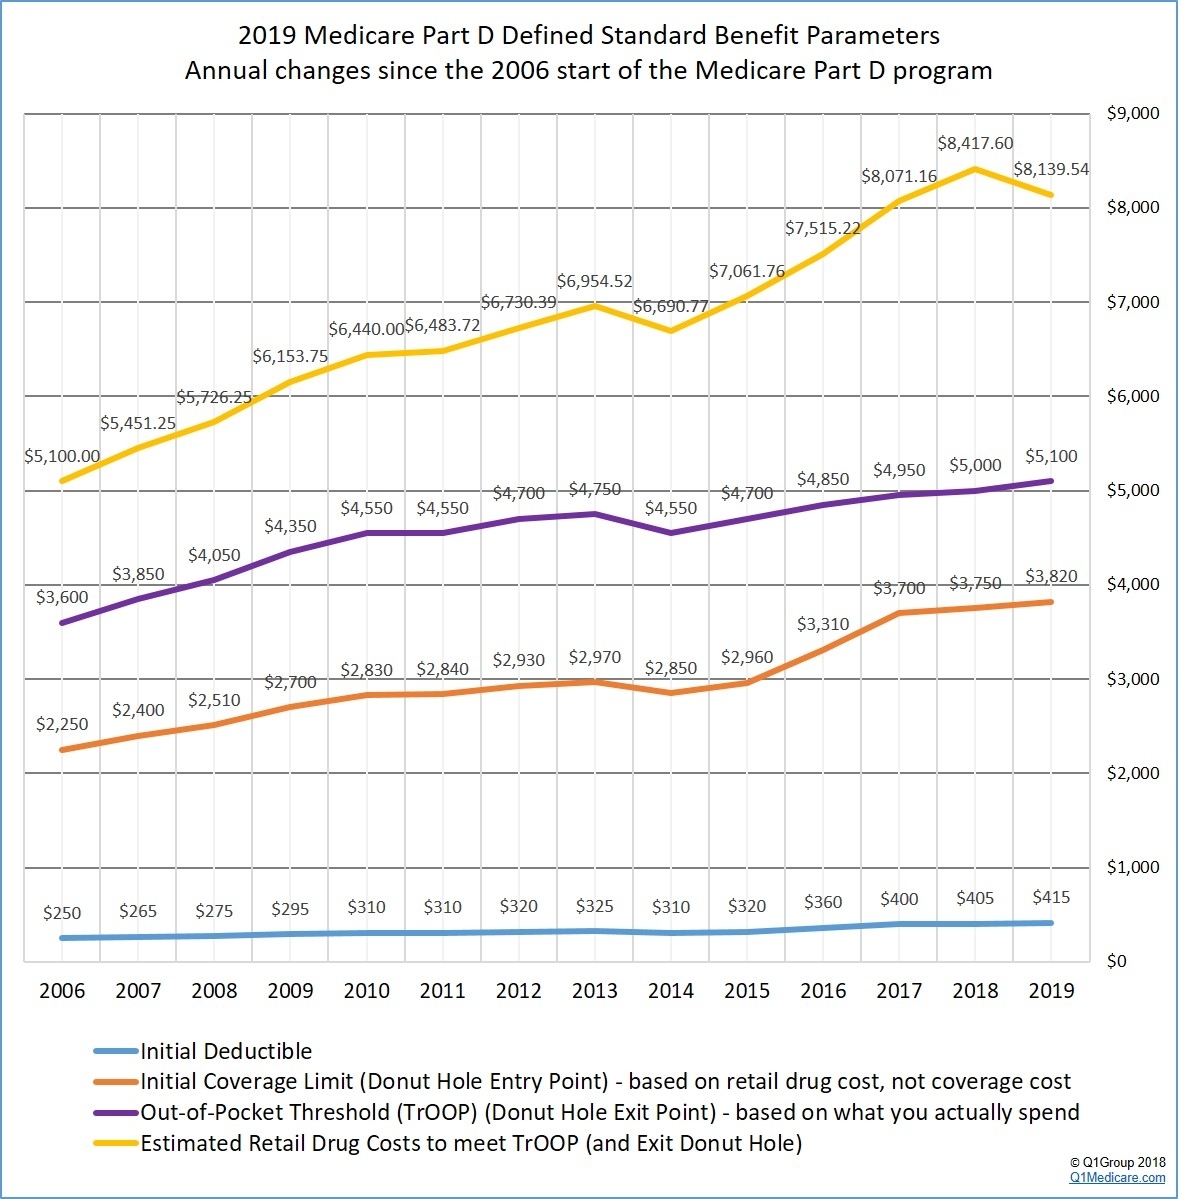 2019 Medicare Part D Program Compared To 2018, 2017, 2016